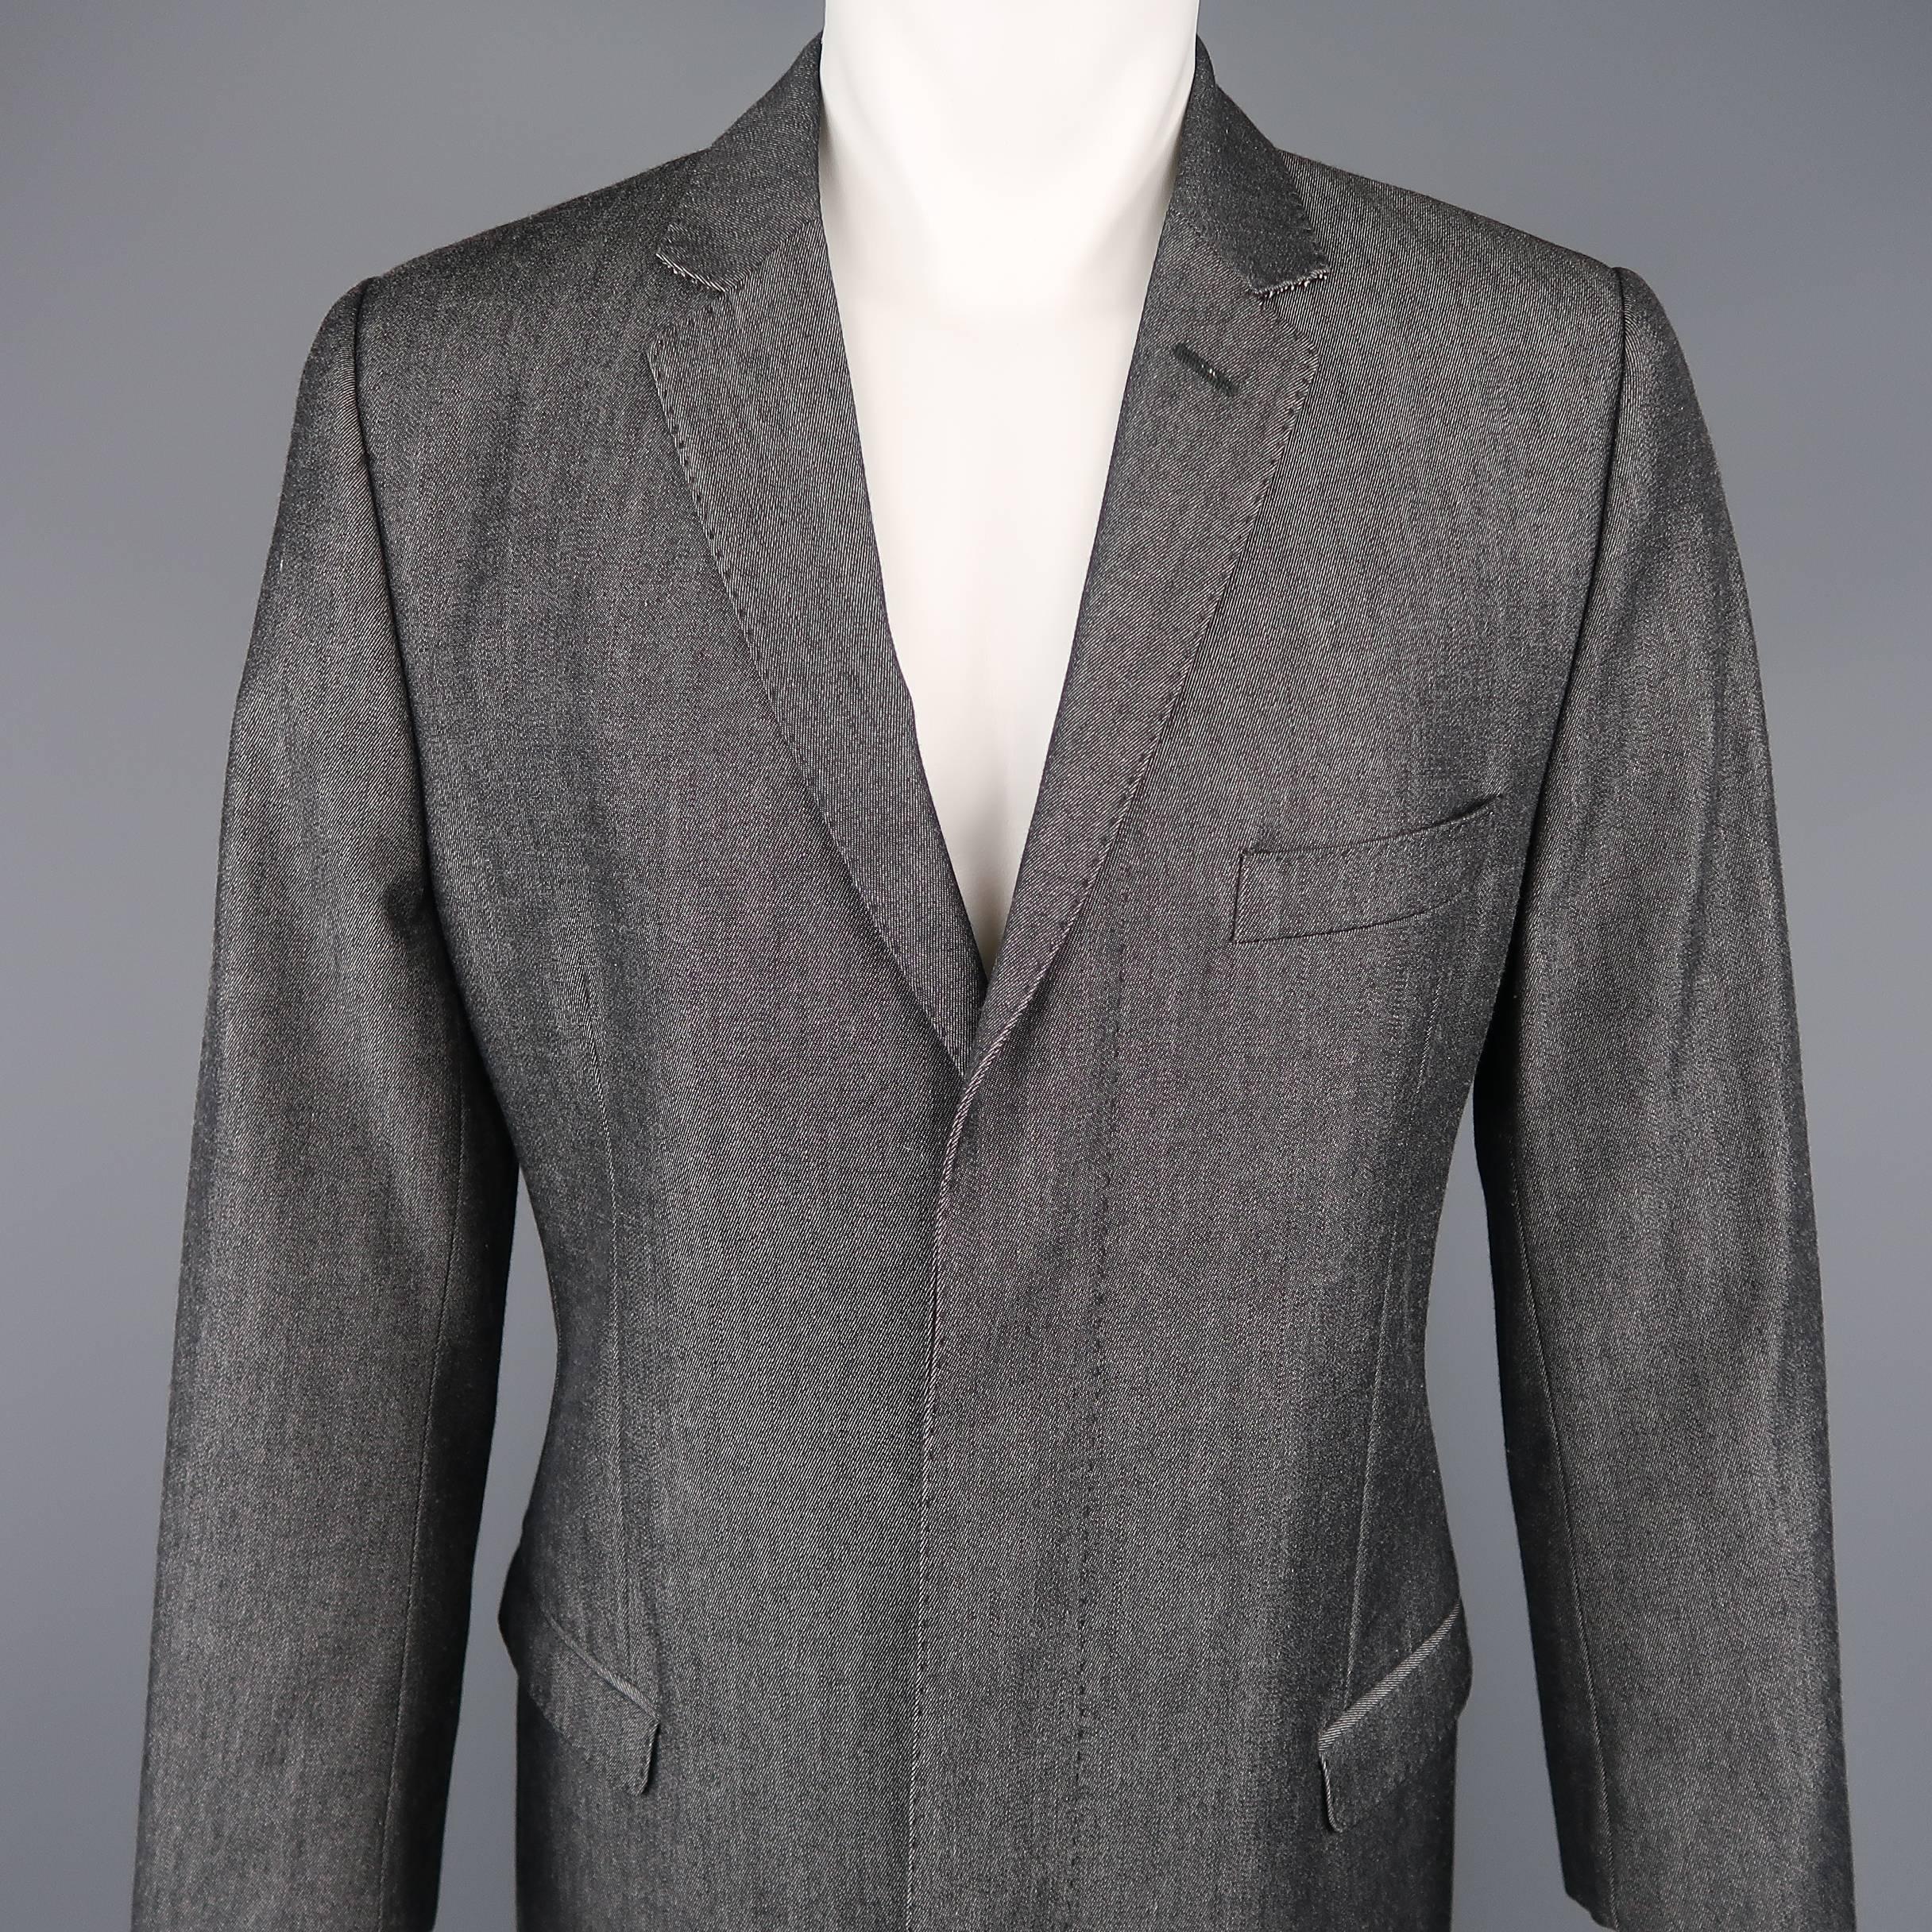 DOLCE & GABBANA coat comes in wool cotton blend denim material with a notch lapel, hidden placket button front, braided button cuffs, and top stitching throughout. Made in Italy.
 
Excellent Pre-Owned Condition.
Marked: IT 50
 
Measurements:
